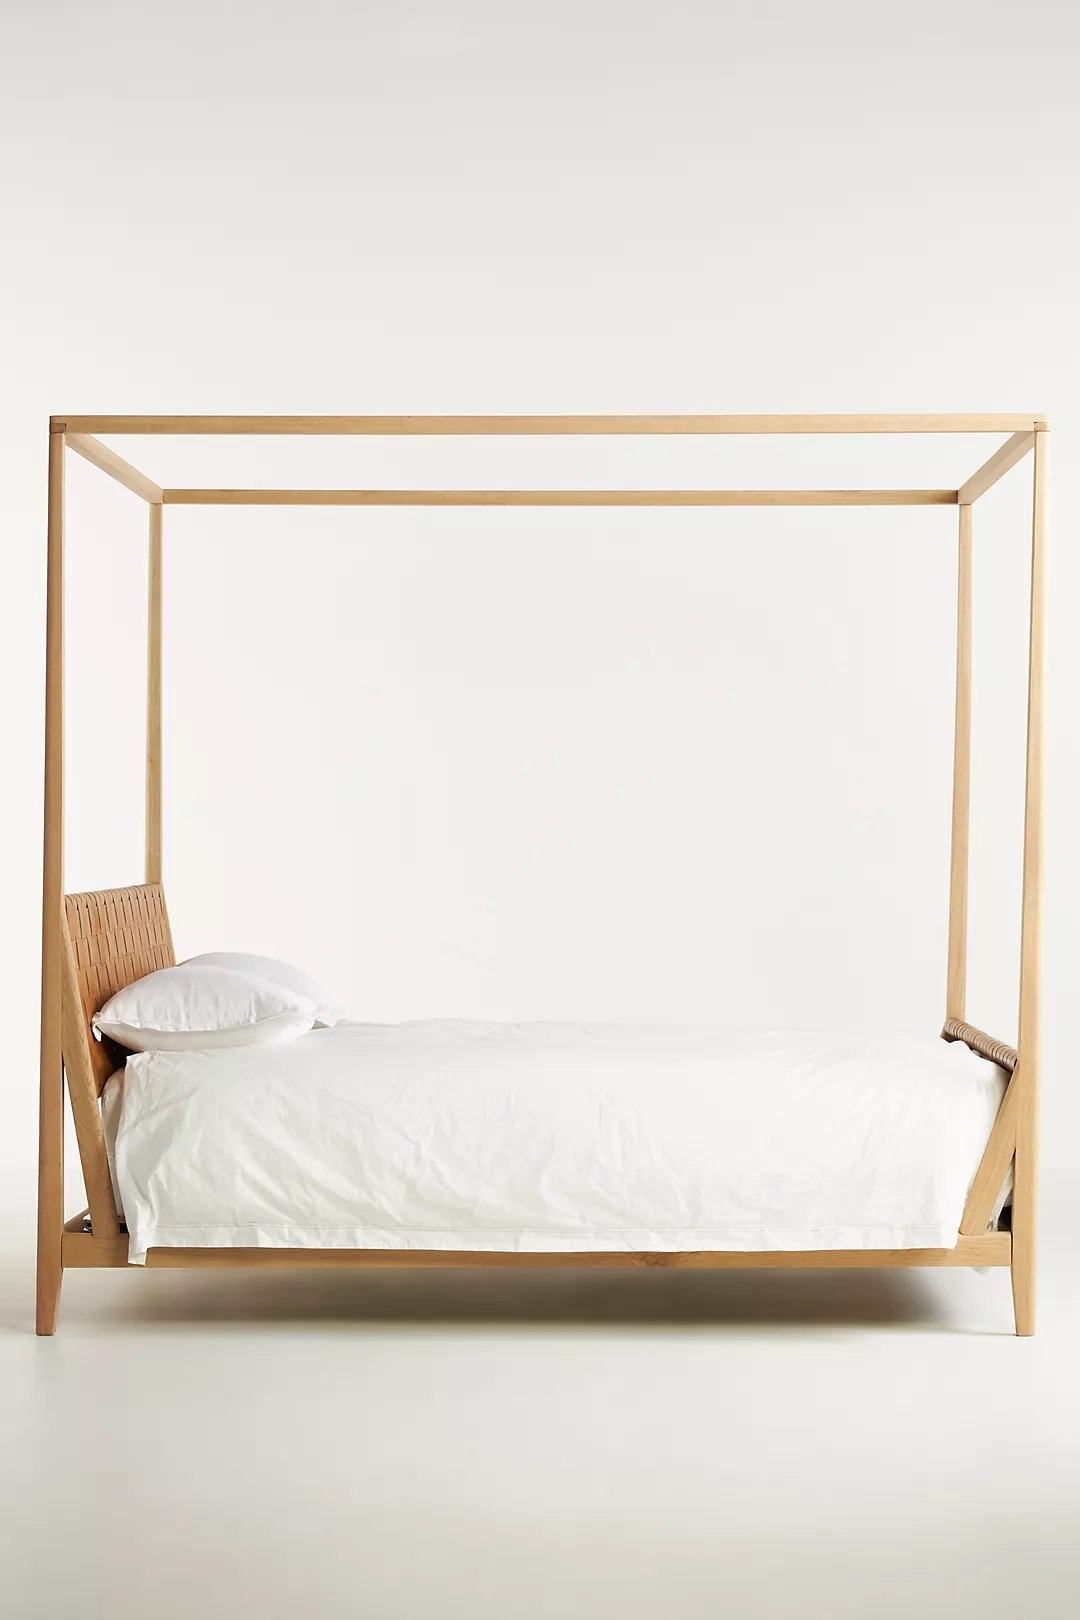 Leather Cove Canopy Bed - Image 3